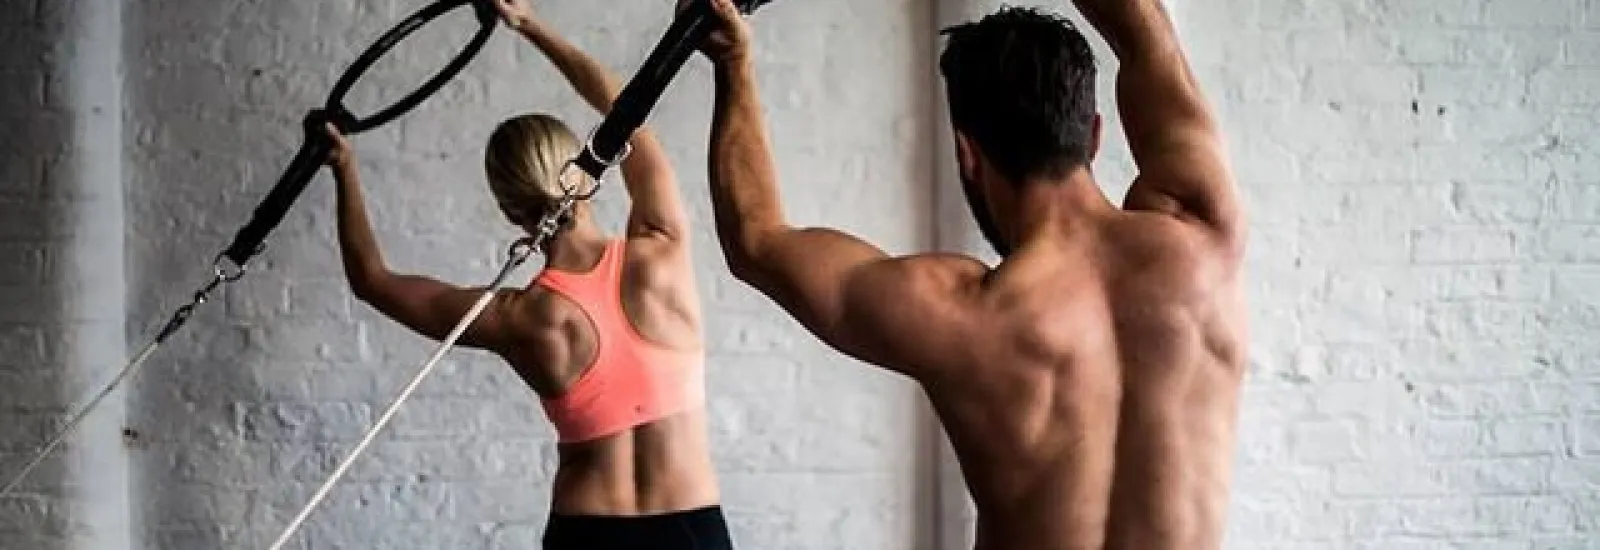 An Upper-Body Workout for People With Shoulder Pain